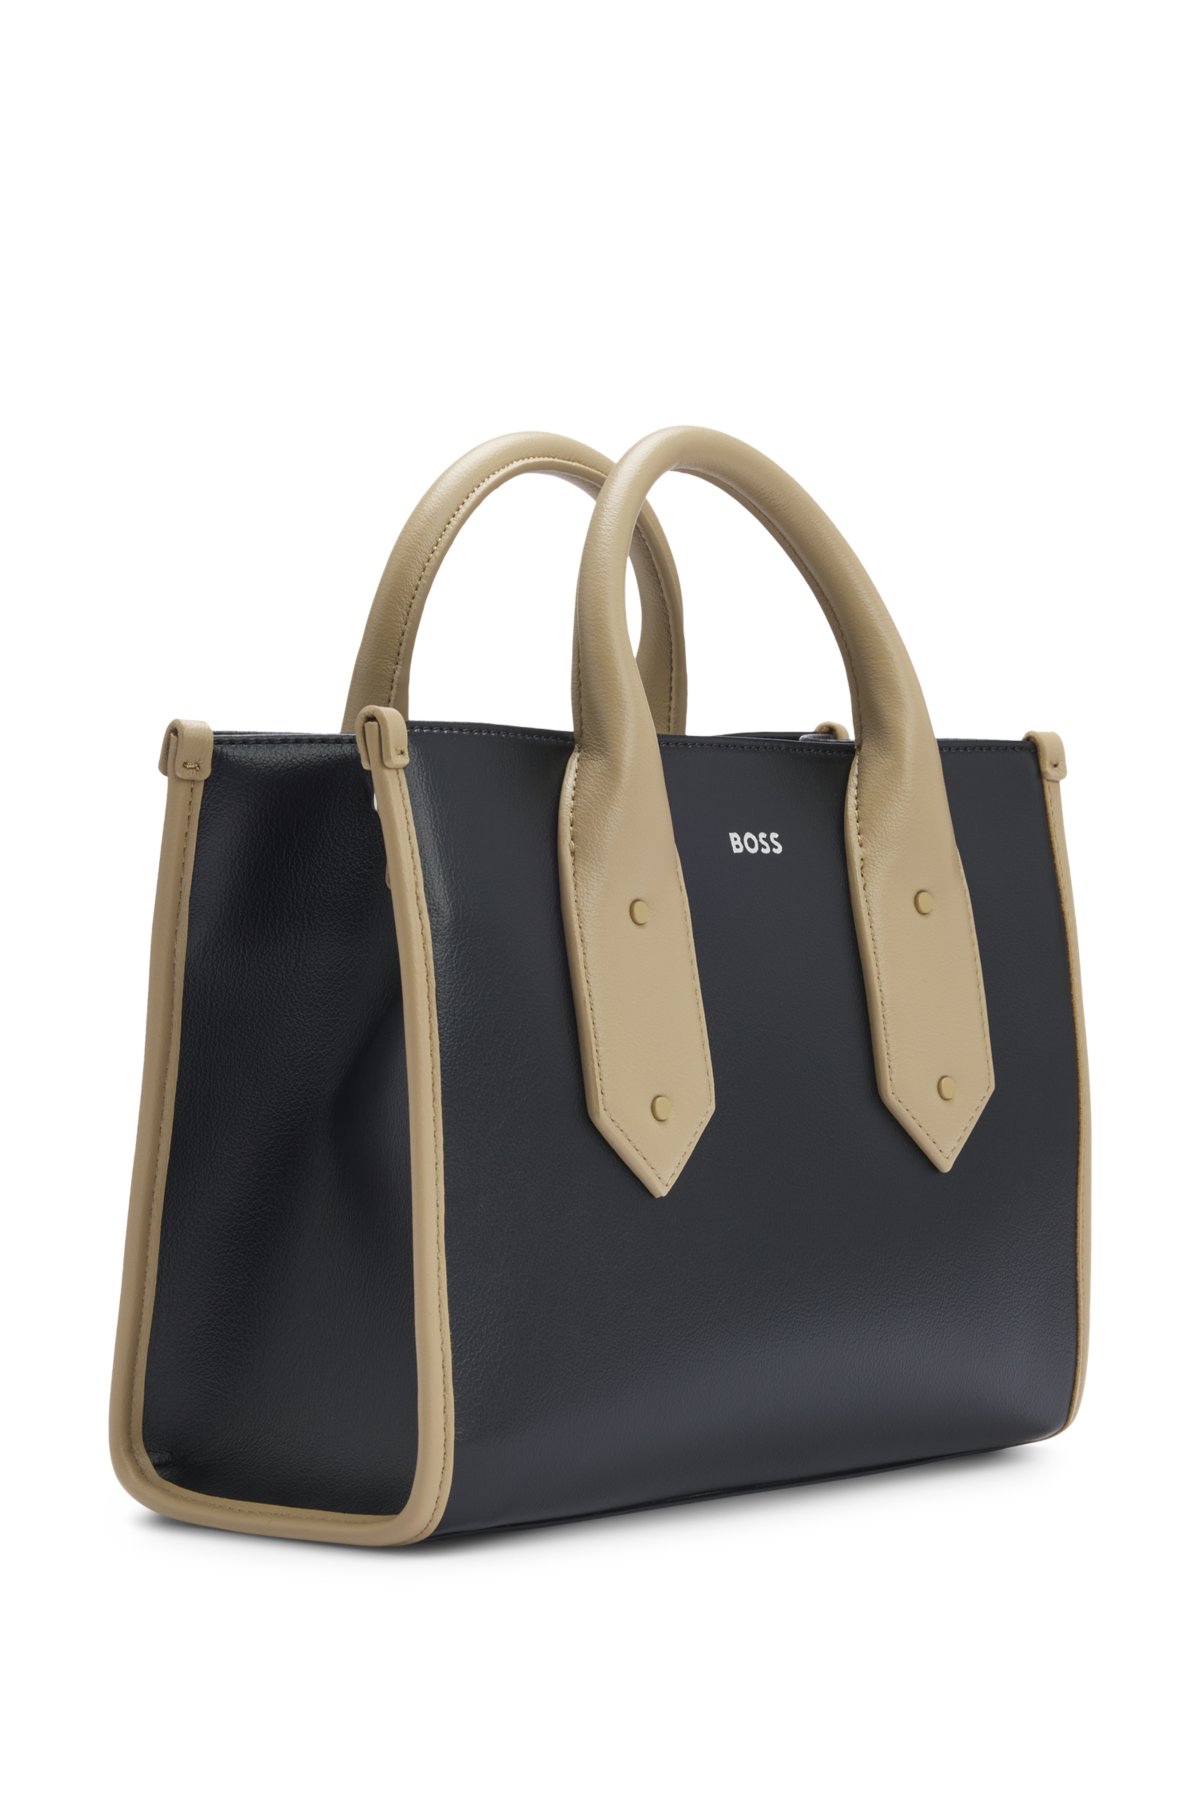 Two-tone faux-leather tote bag with signature details, Black